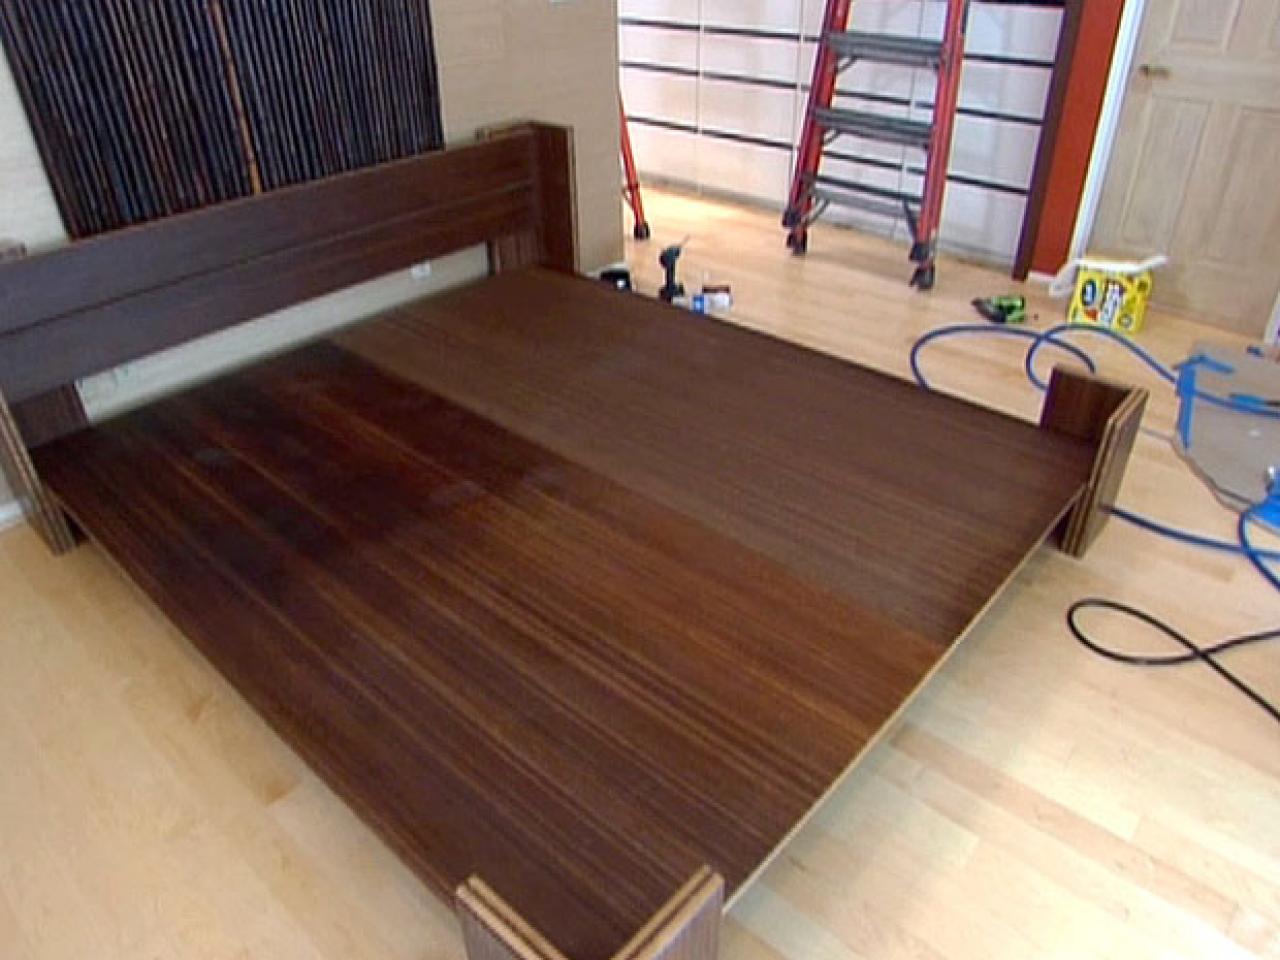 How To Build A Bamboo Platform Bed, How To Build Platform Bed Frame King Size